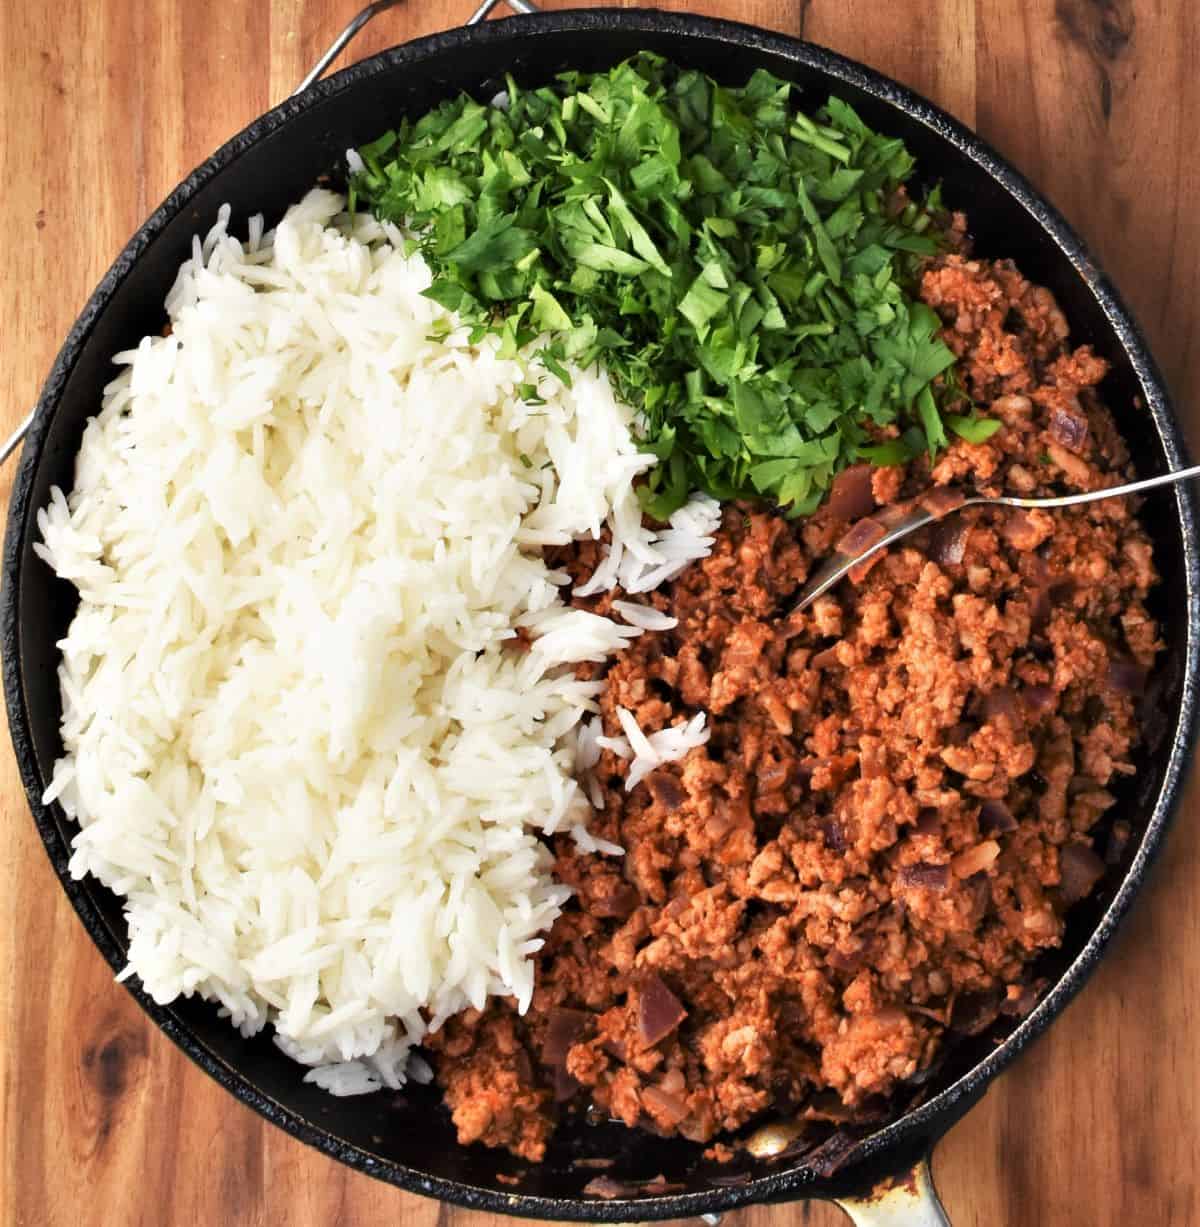 Ground turkey, cooked rice and fresh herbs in large shallow pan.